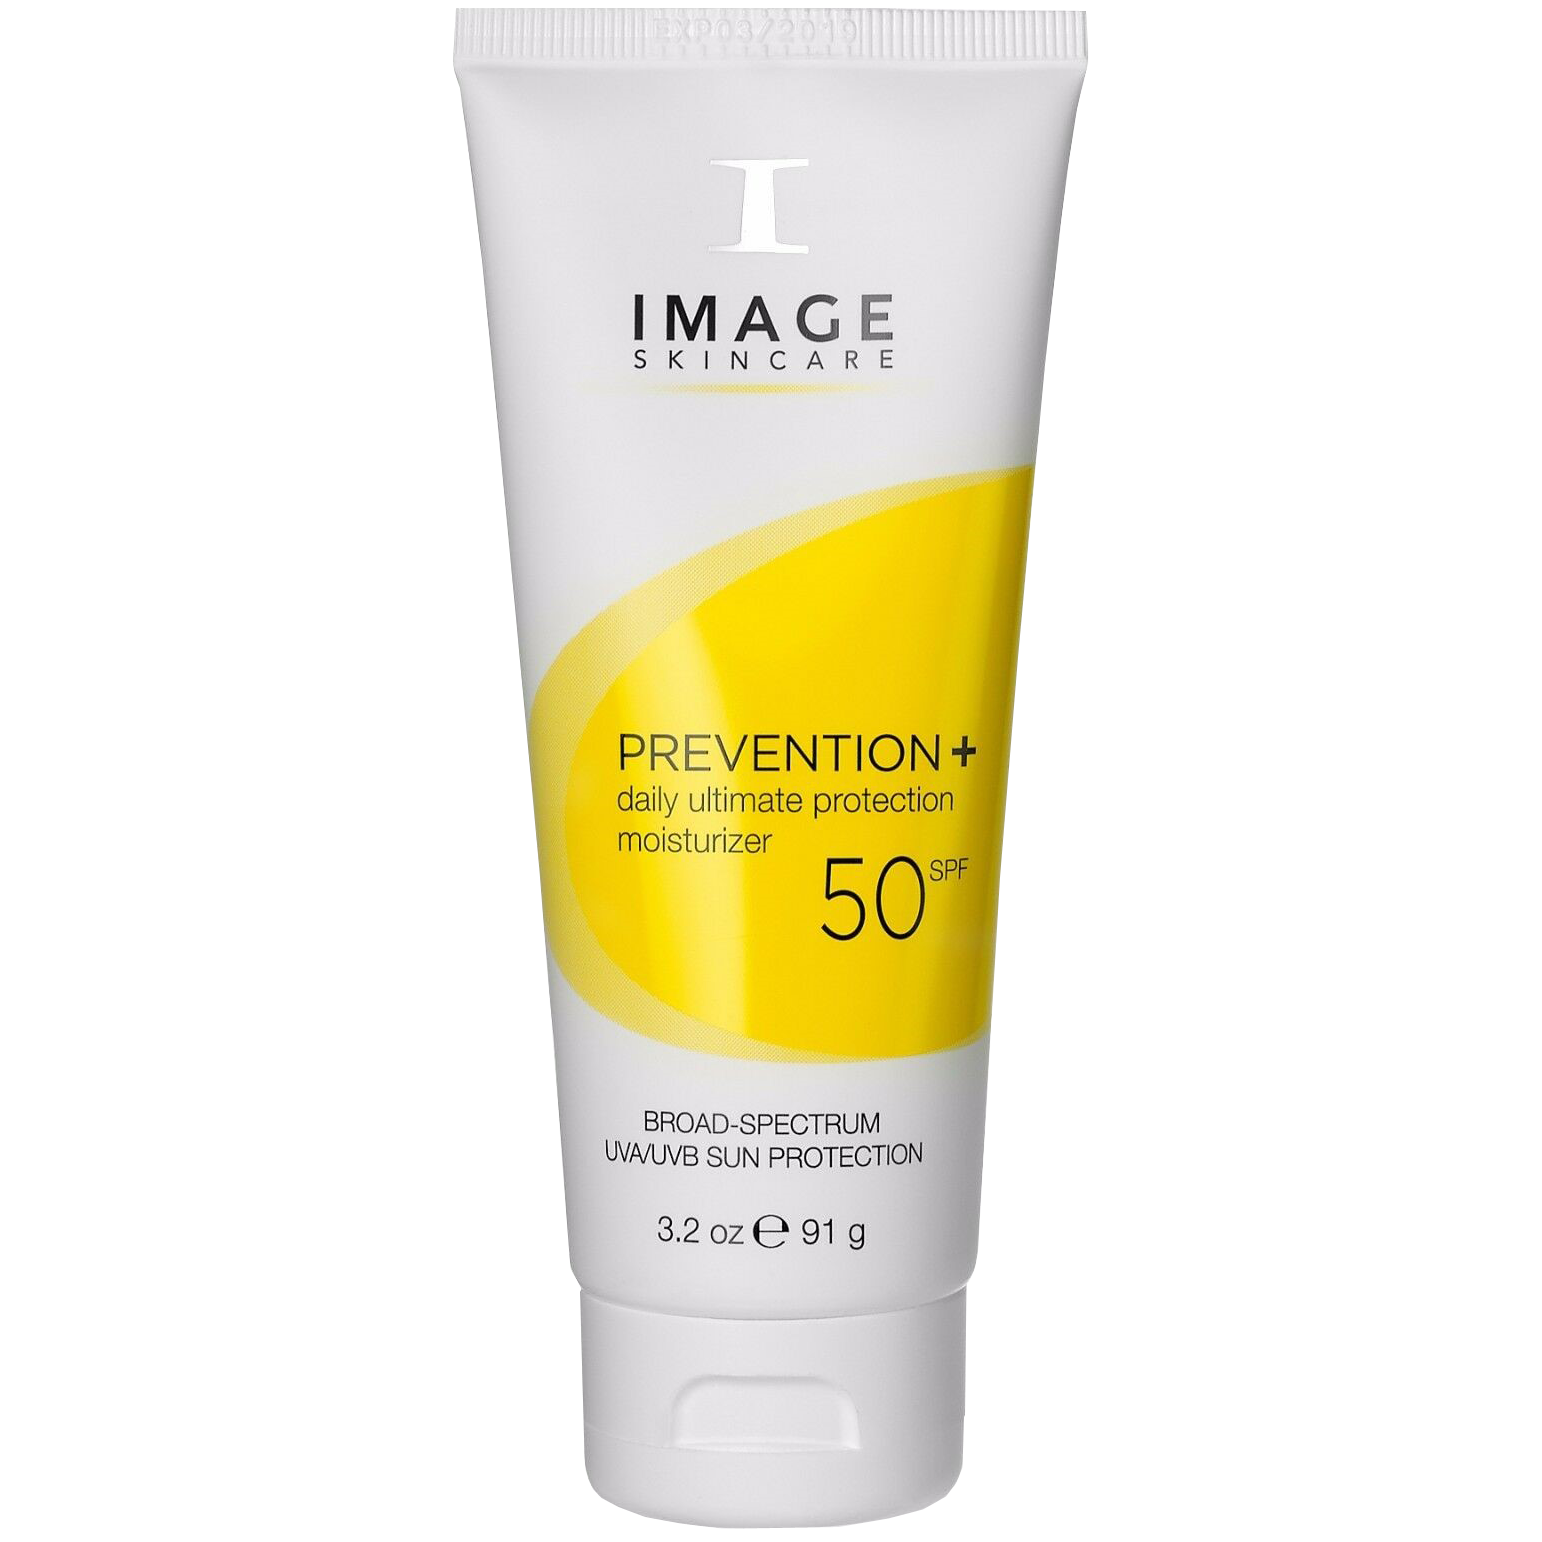 PREVENTION+ daily ultimate protection moisturizer SPF 50